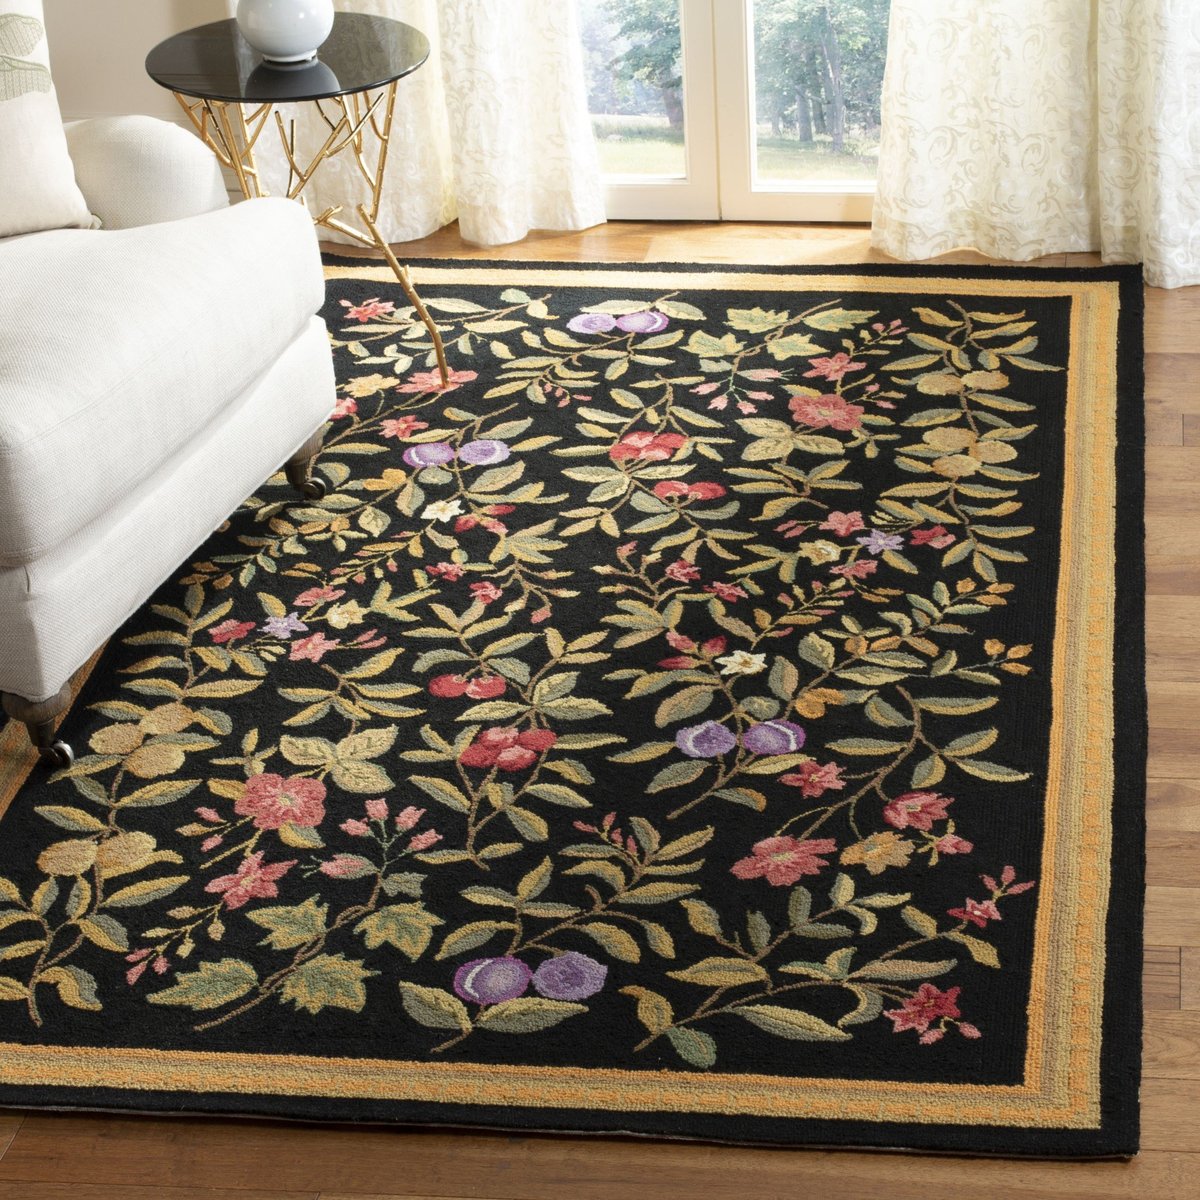 Chelsea Collection Area Rug - 4' Round, Black & Brown, Hand-Hooked